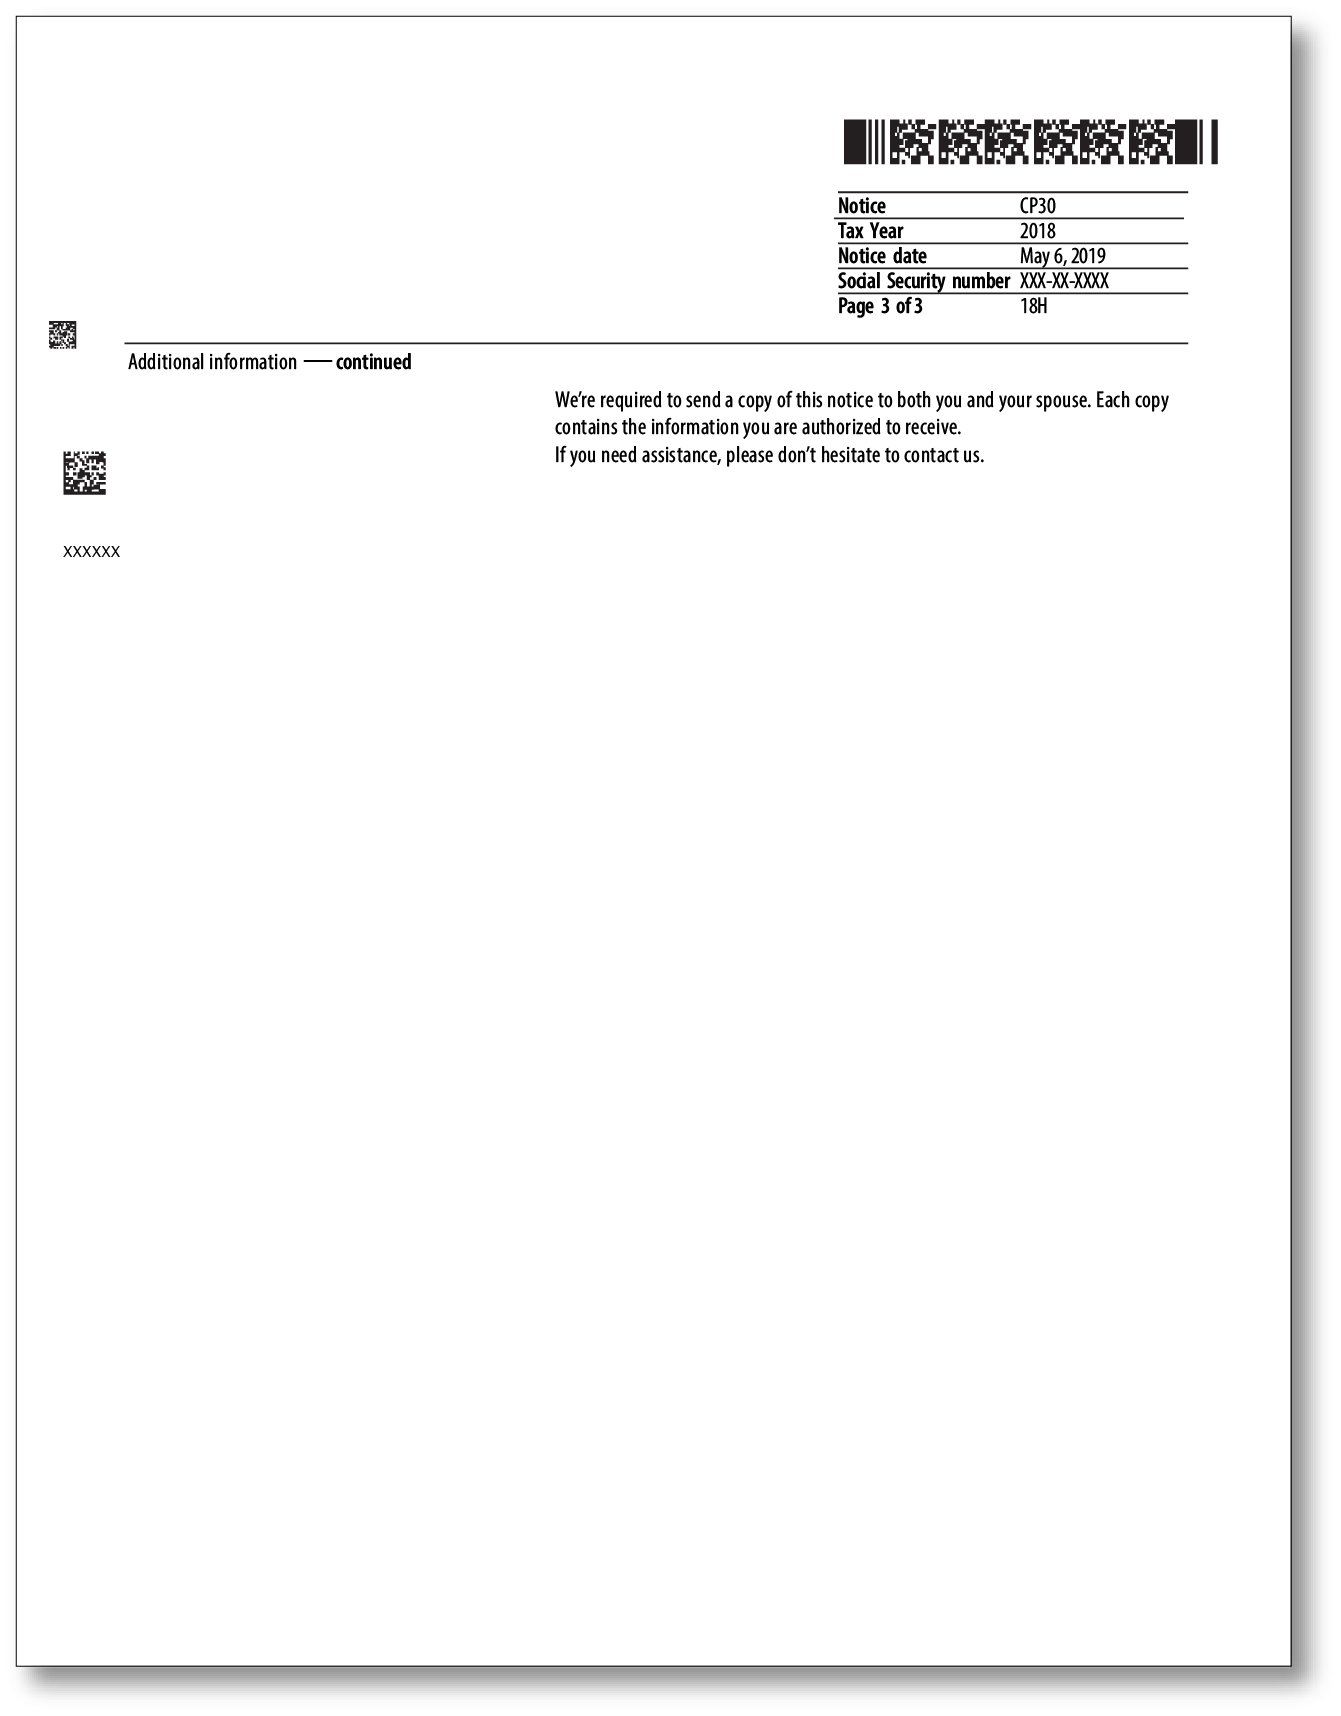 IRS Audit Letter CP30 – Sample 1